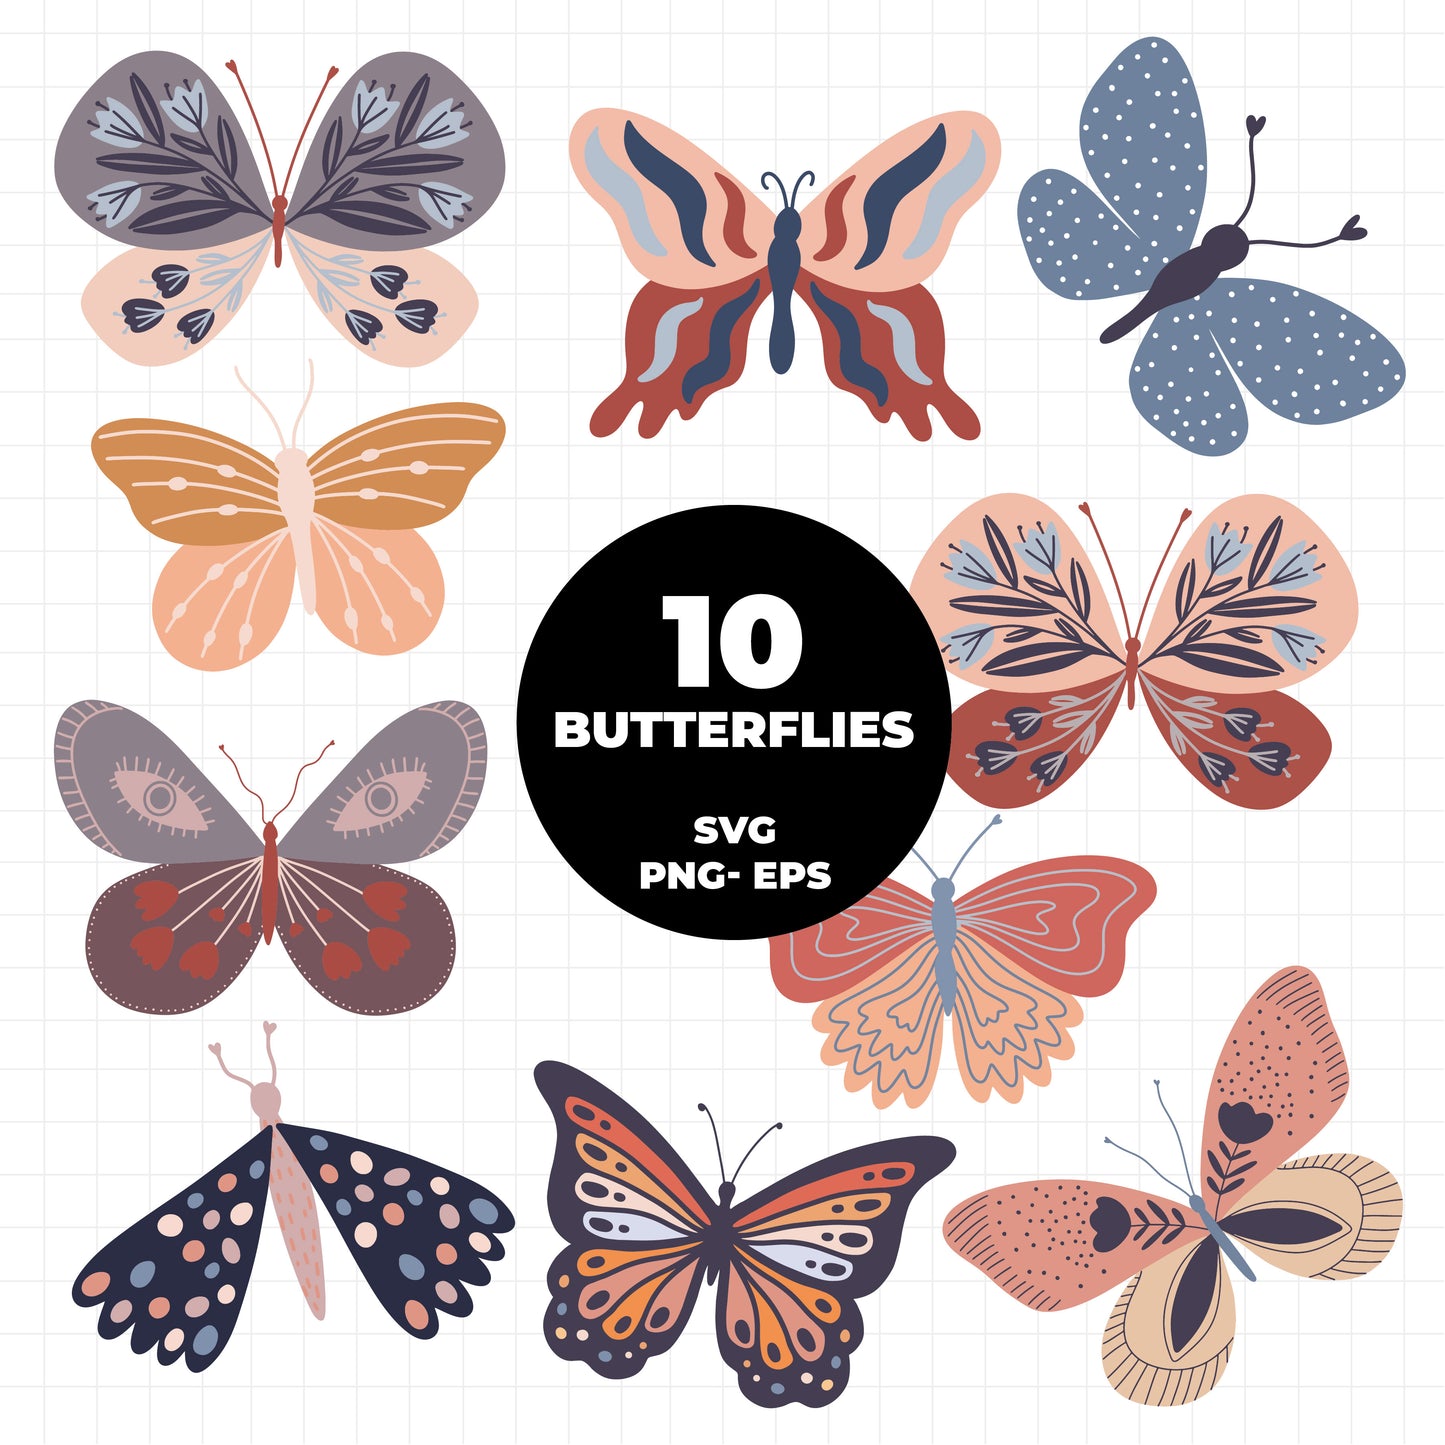 COD1380 - Butterflies cliparts, butterfly clipart set svg, tatto cliparts, butterfly svg, Digital Stamp, Commercial use